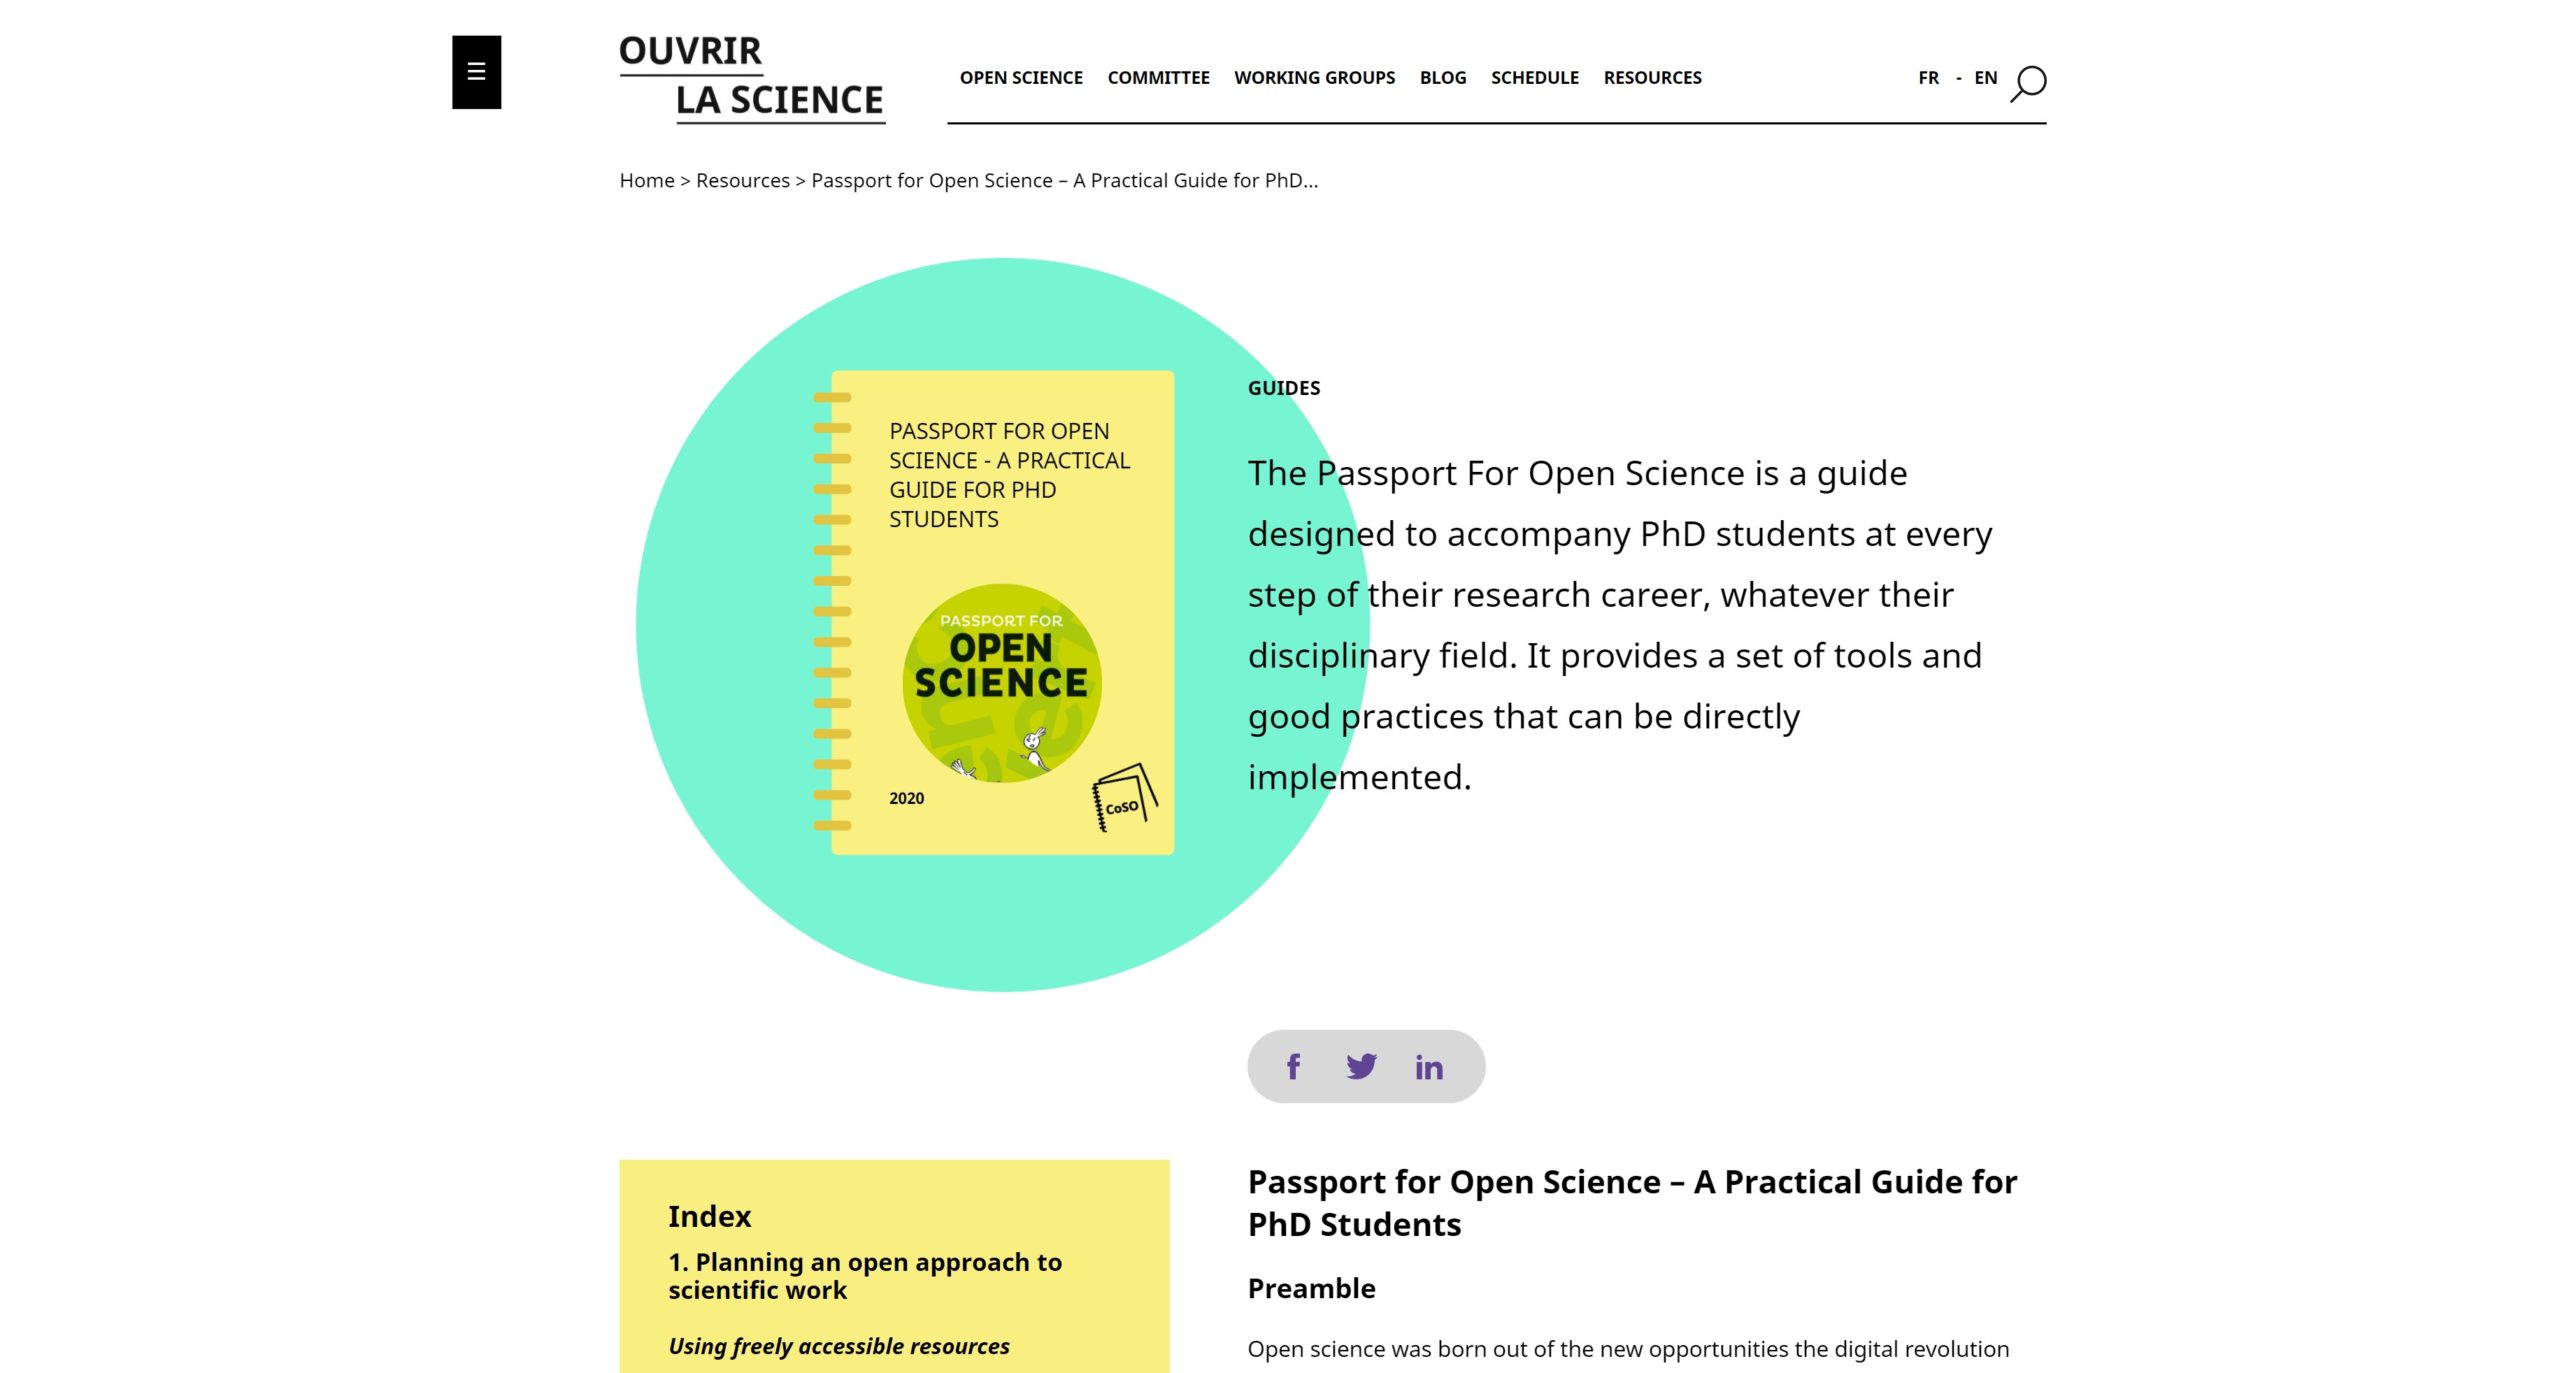 Passport for Open Science – A Practical Guide for PhD Students